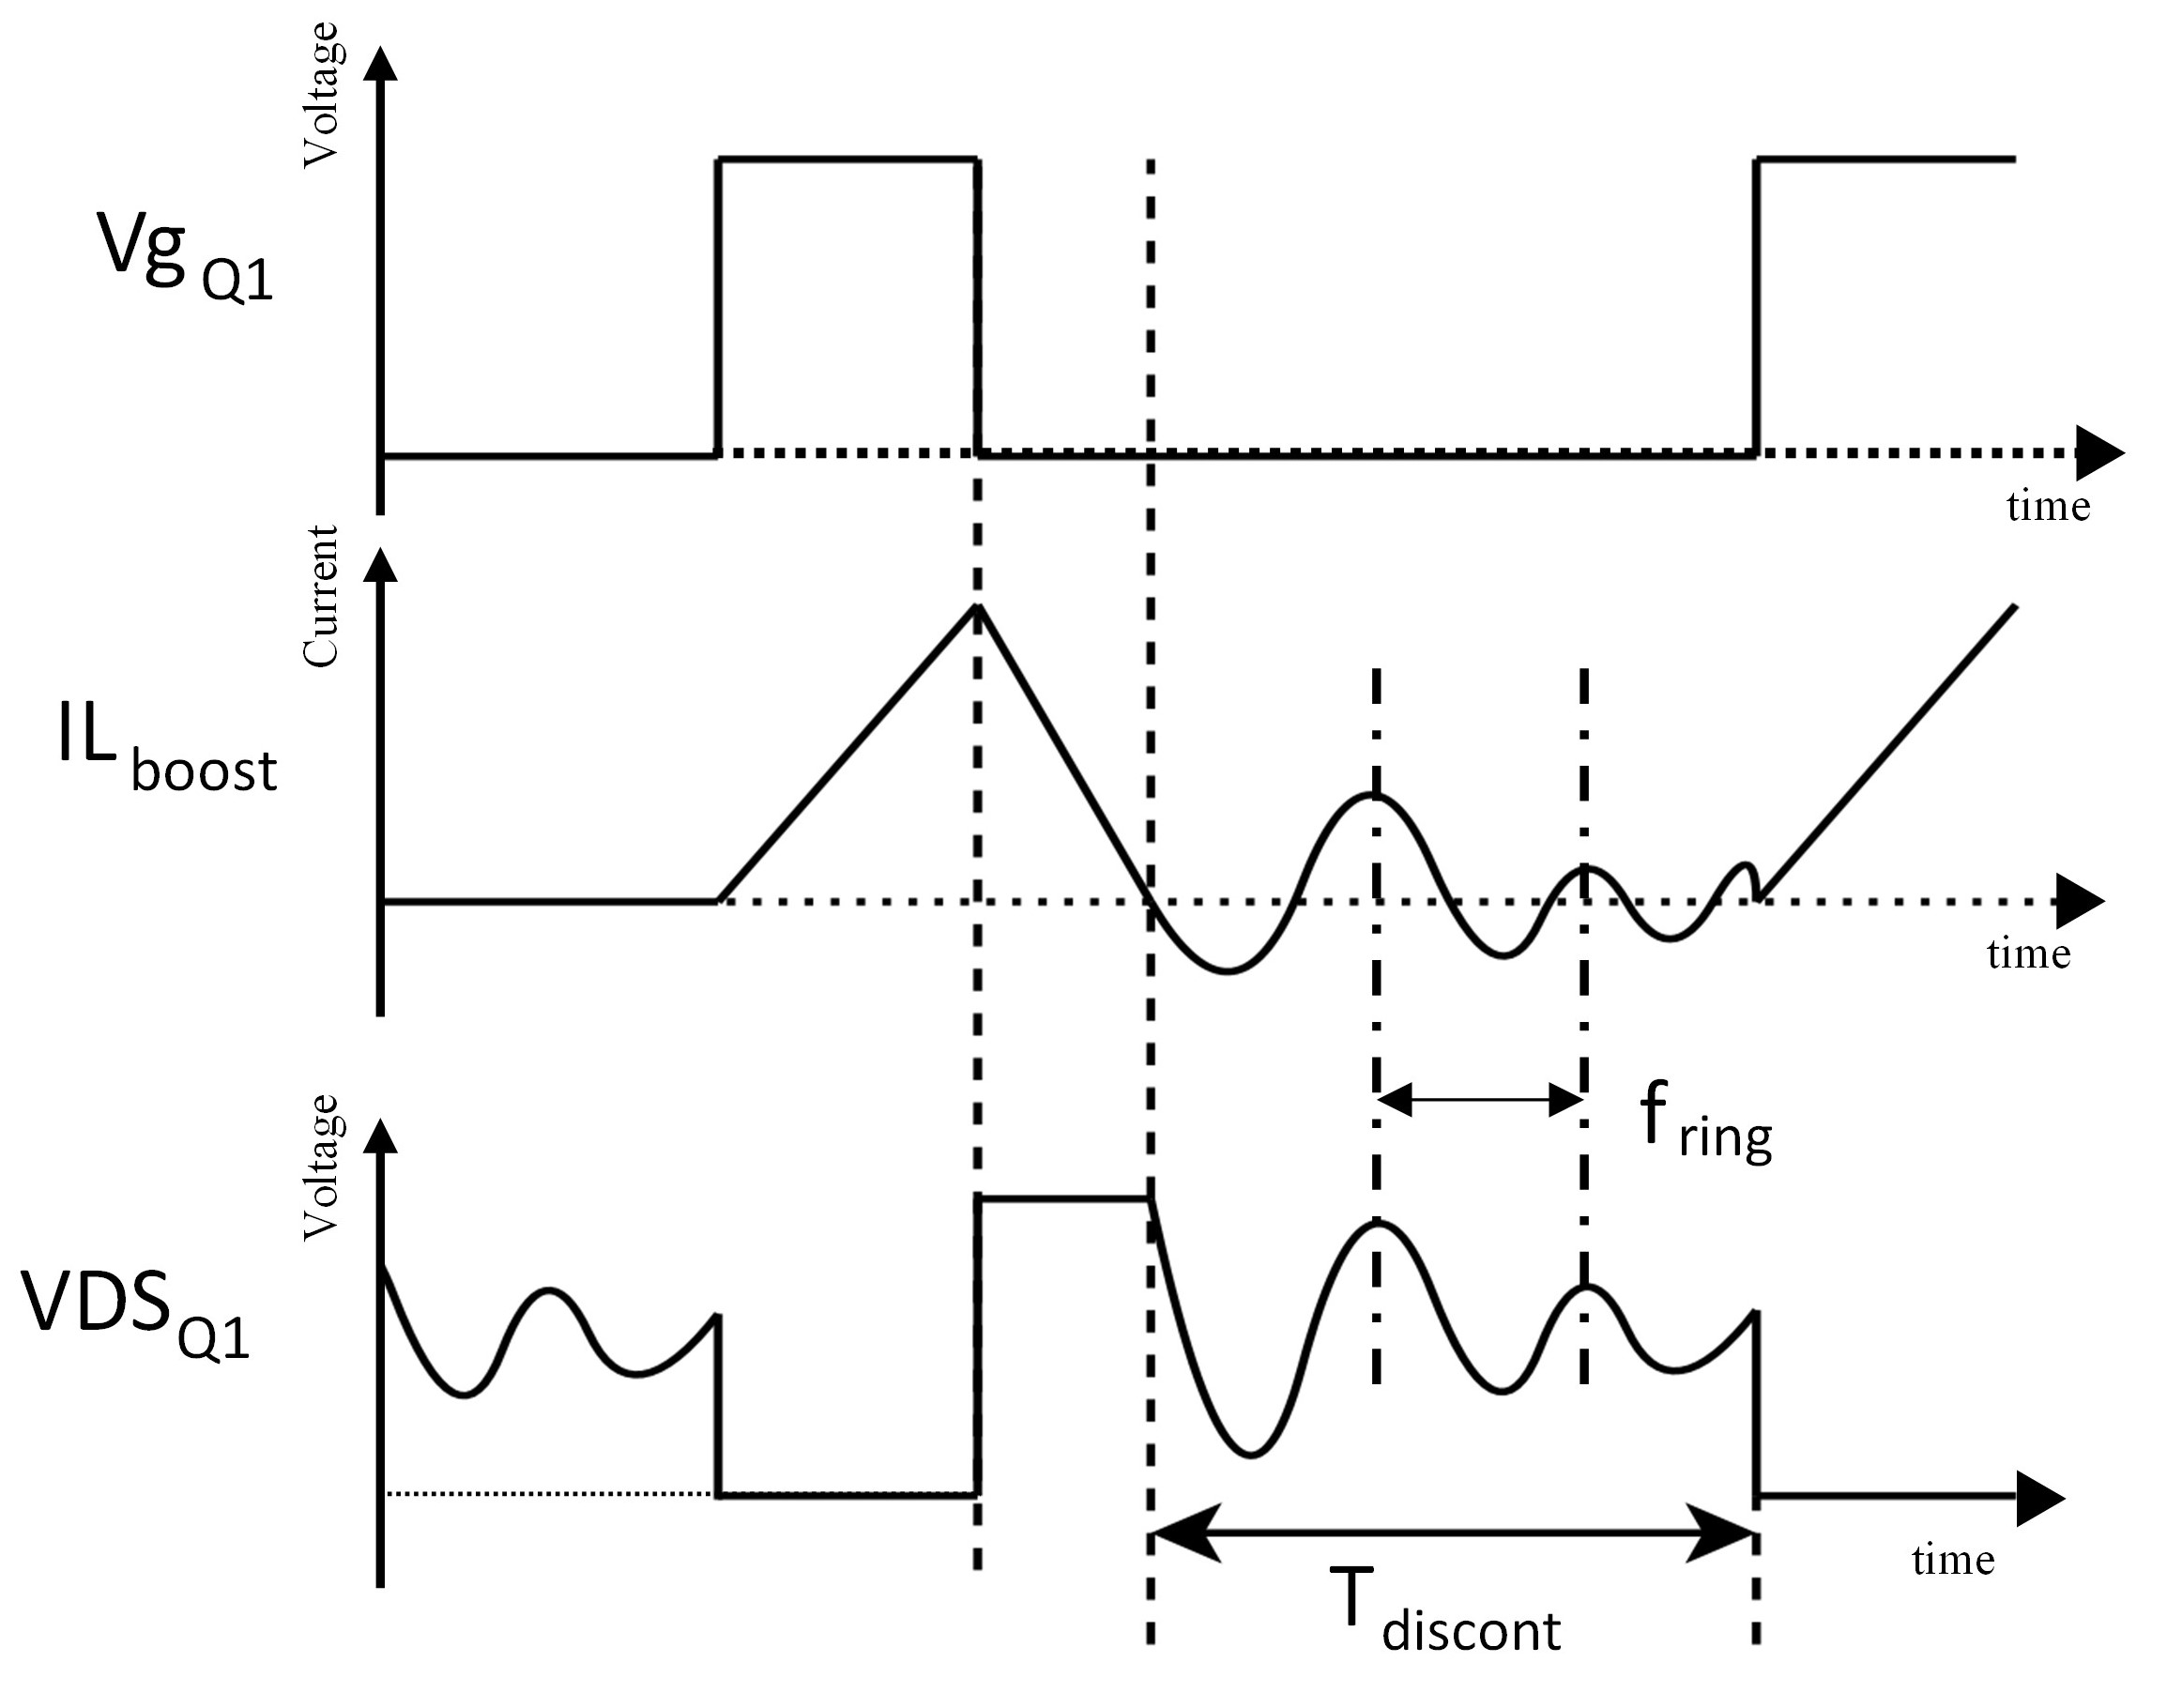 Fig. 4 Switching waveform during DCM operation